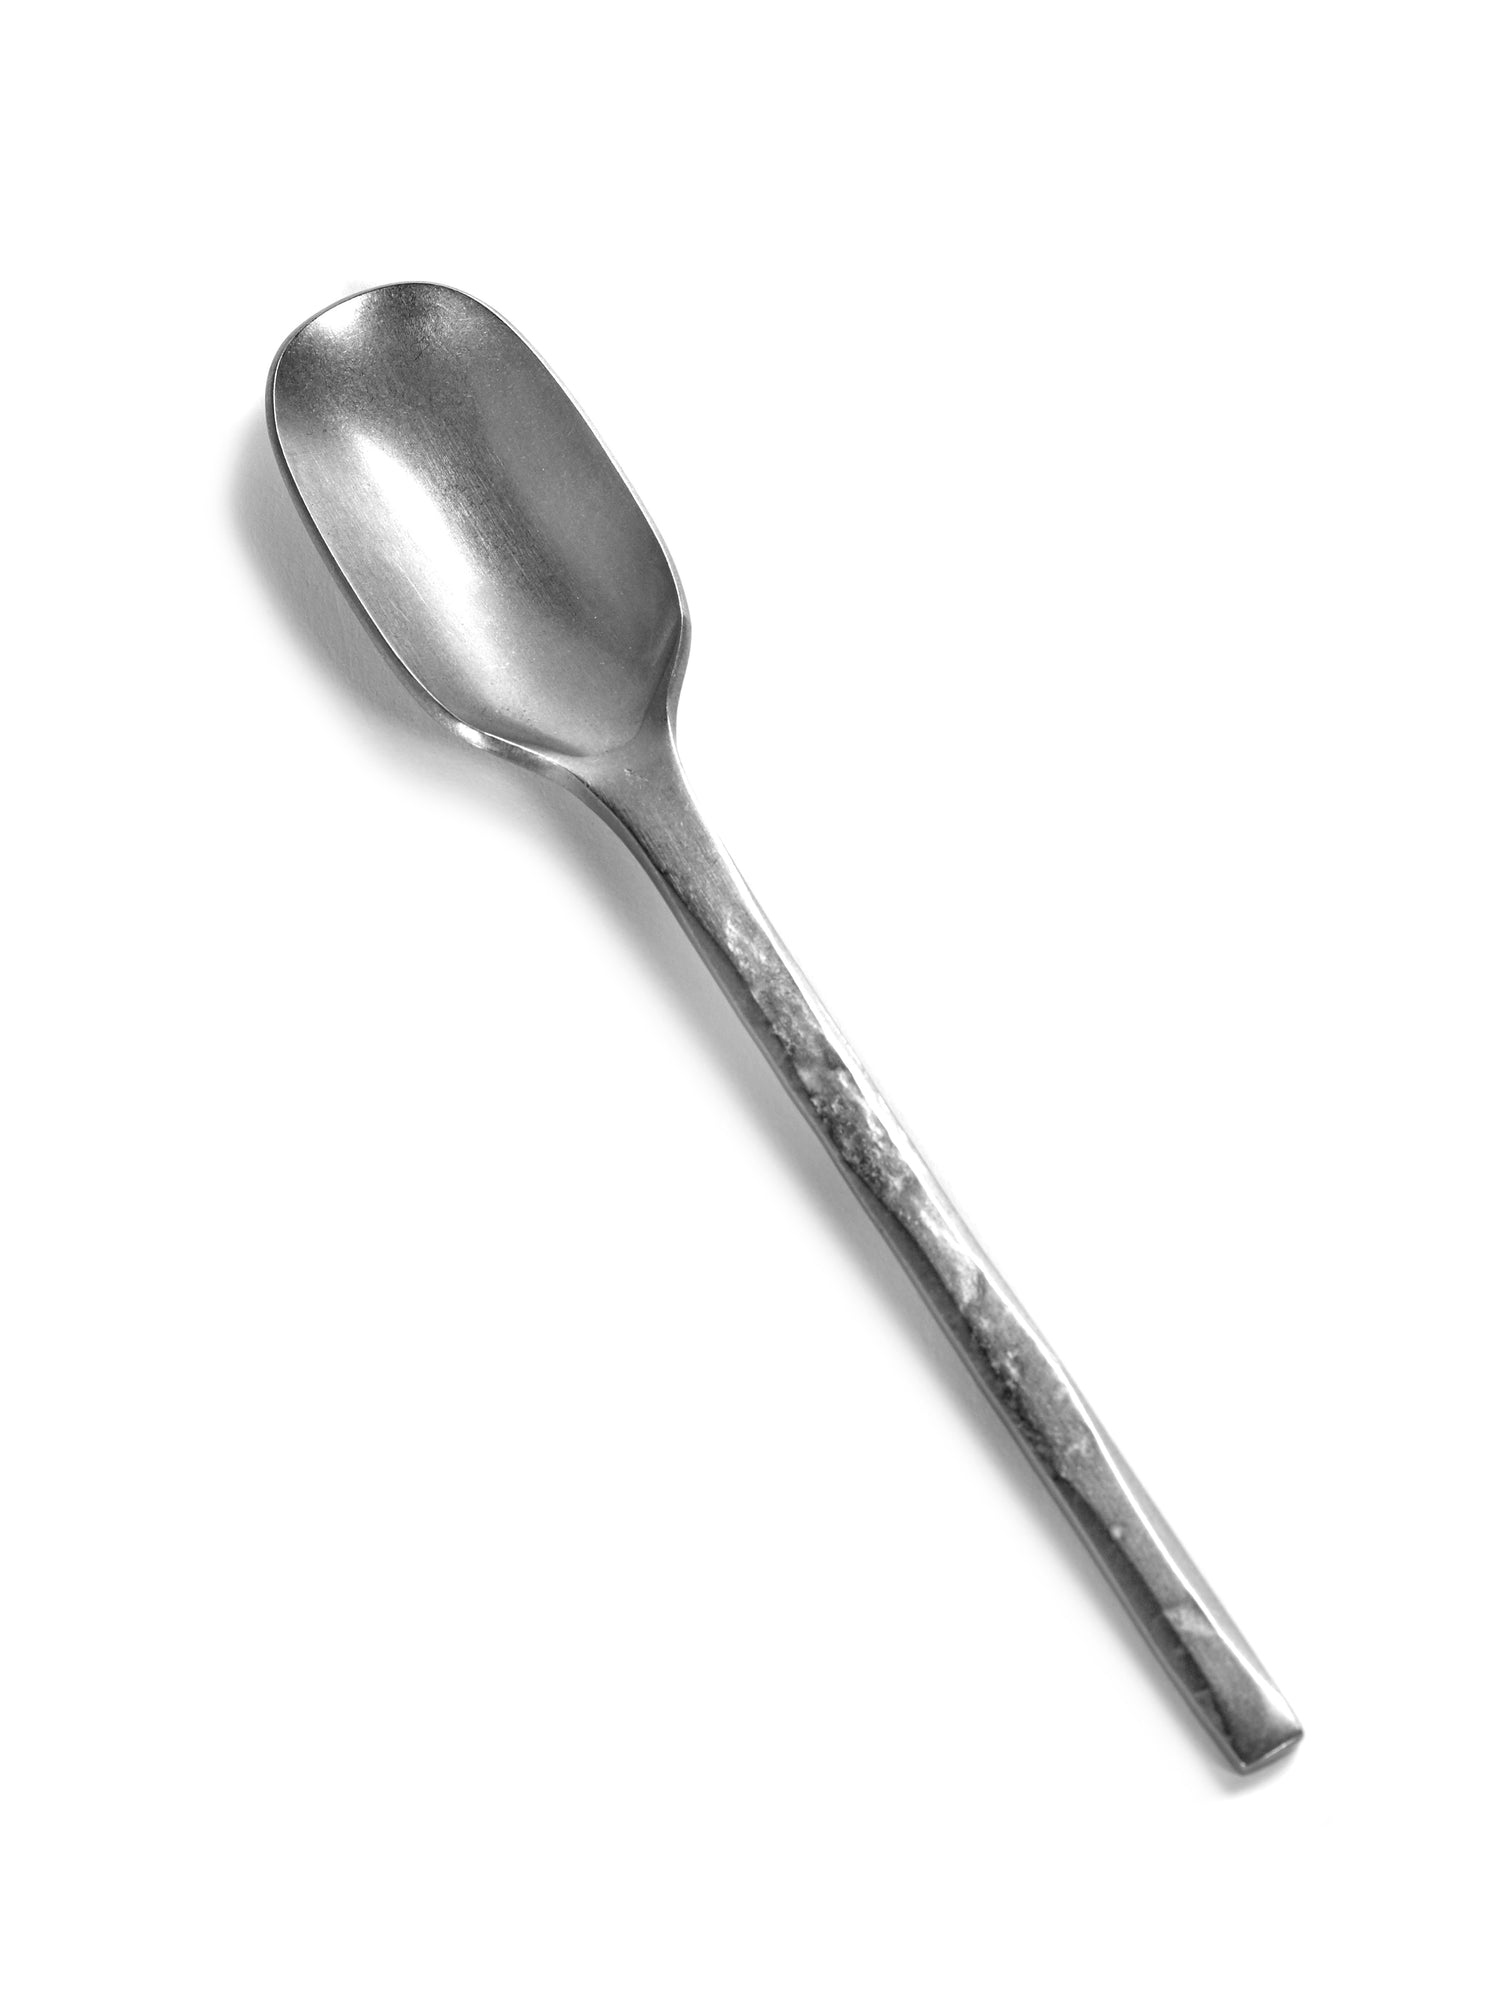 Stainless Steel Spoon, La Nouvelle Table Cutlery by Merci